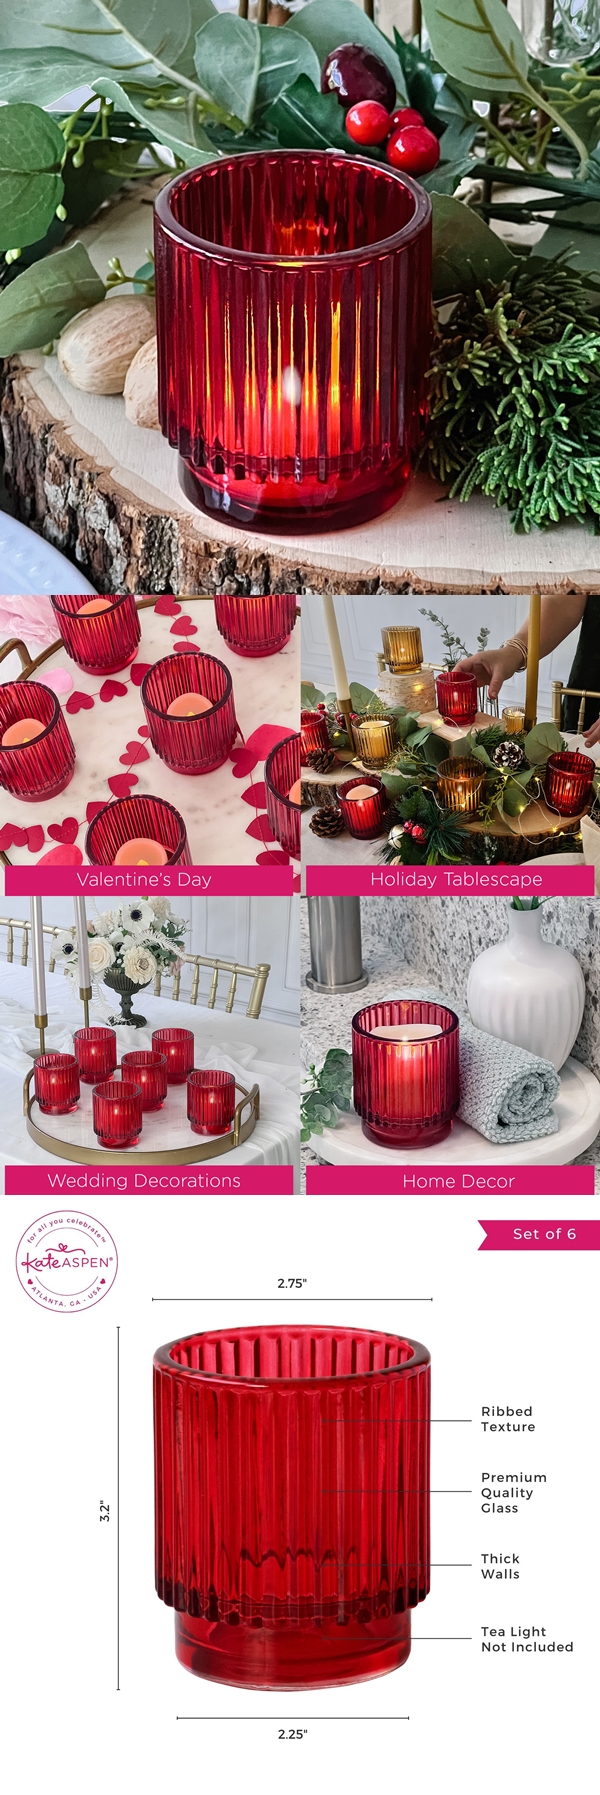 Kate Aspen Ribbed Red-Colored Glass Votive Candle Holders (Set of 6)